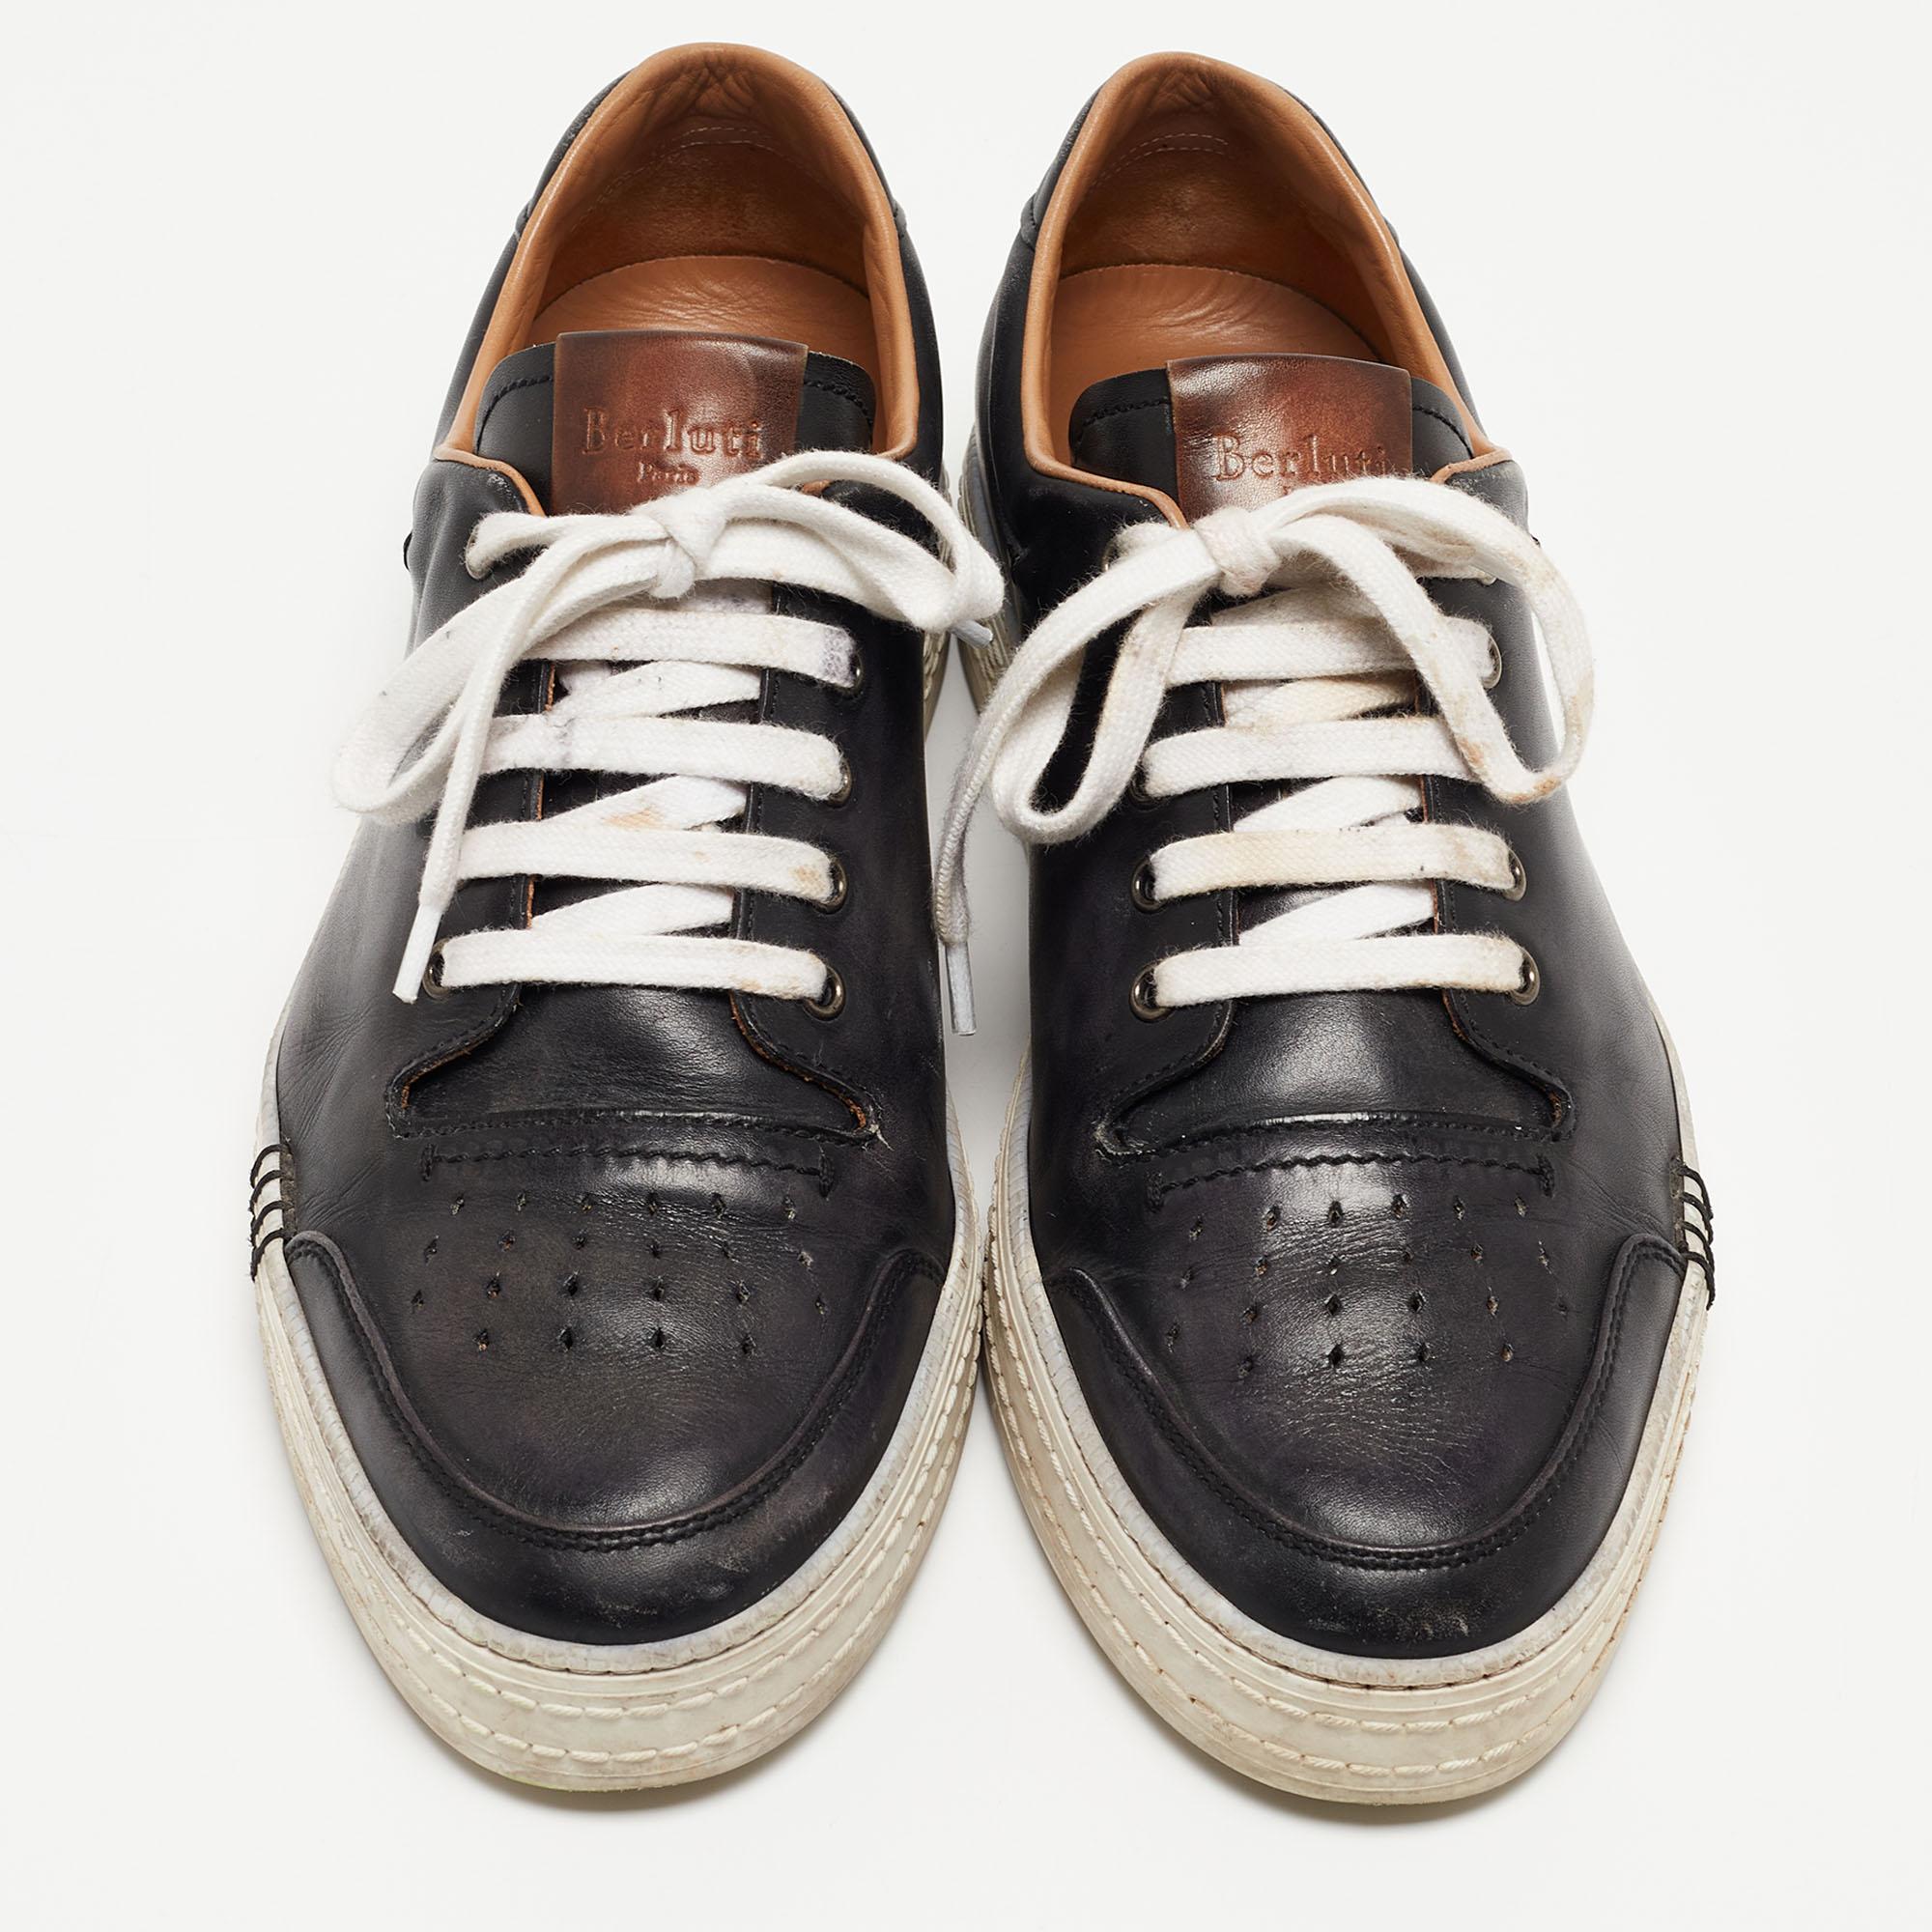 Elevate your footwear game with these Berluti sneakers. Combining high-end aesthetics and unmatched comfort, these sneakers are a symbol of modern luxury and impeccable taste.

